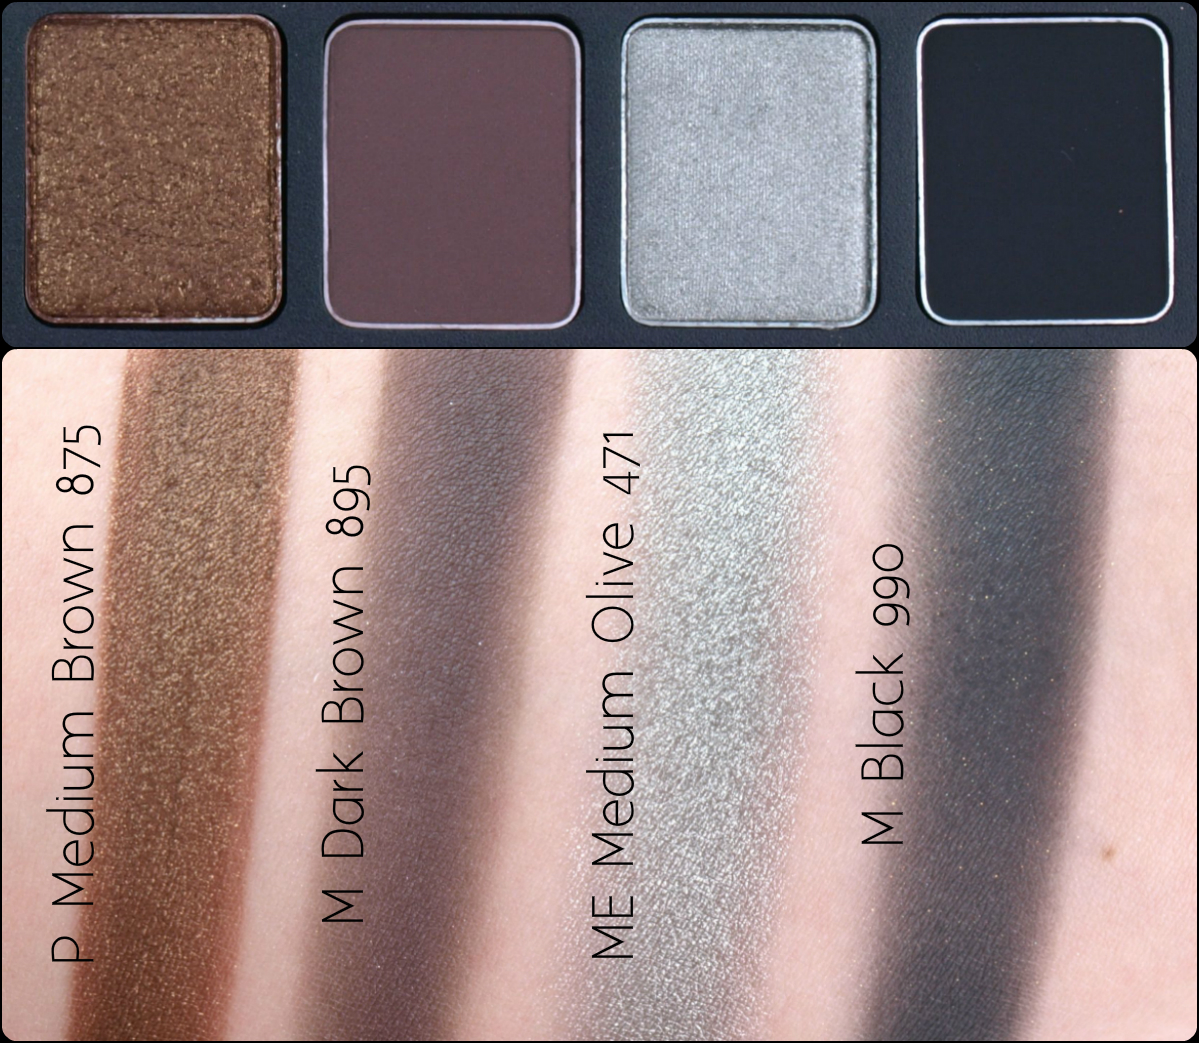 Shu Uemura Shu:Palette 16 Shades of Nude: Review and Swatches